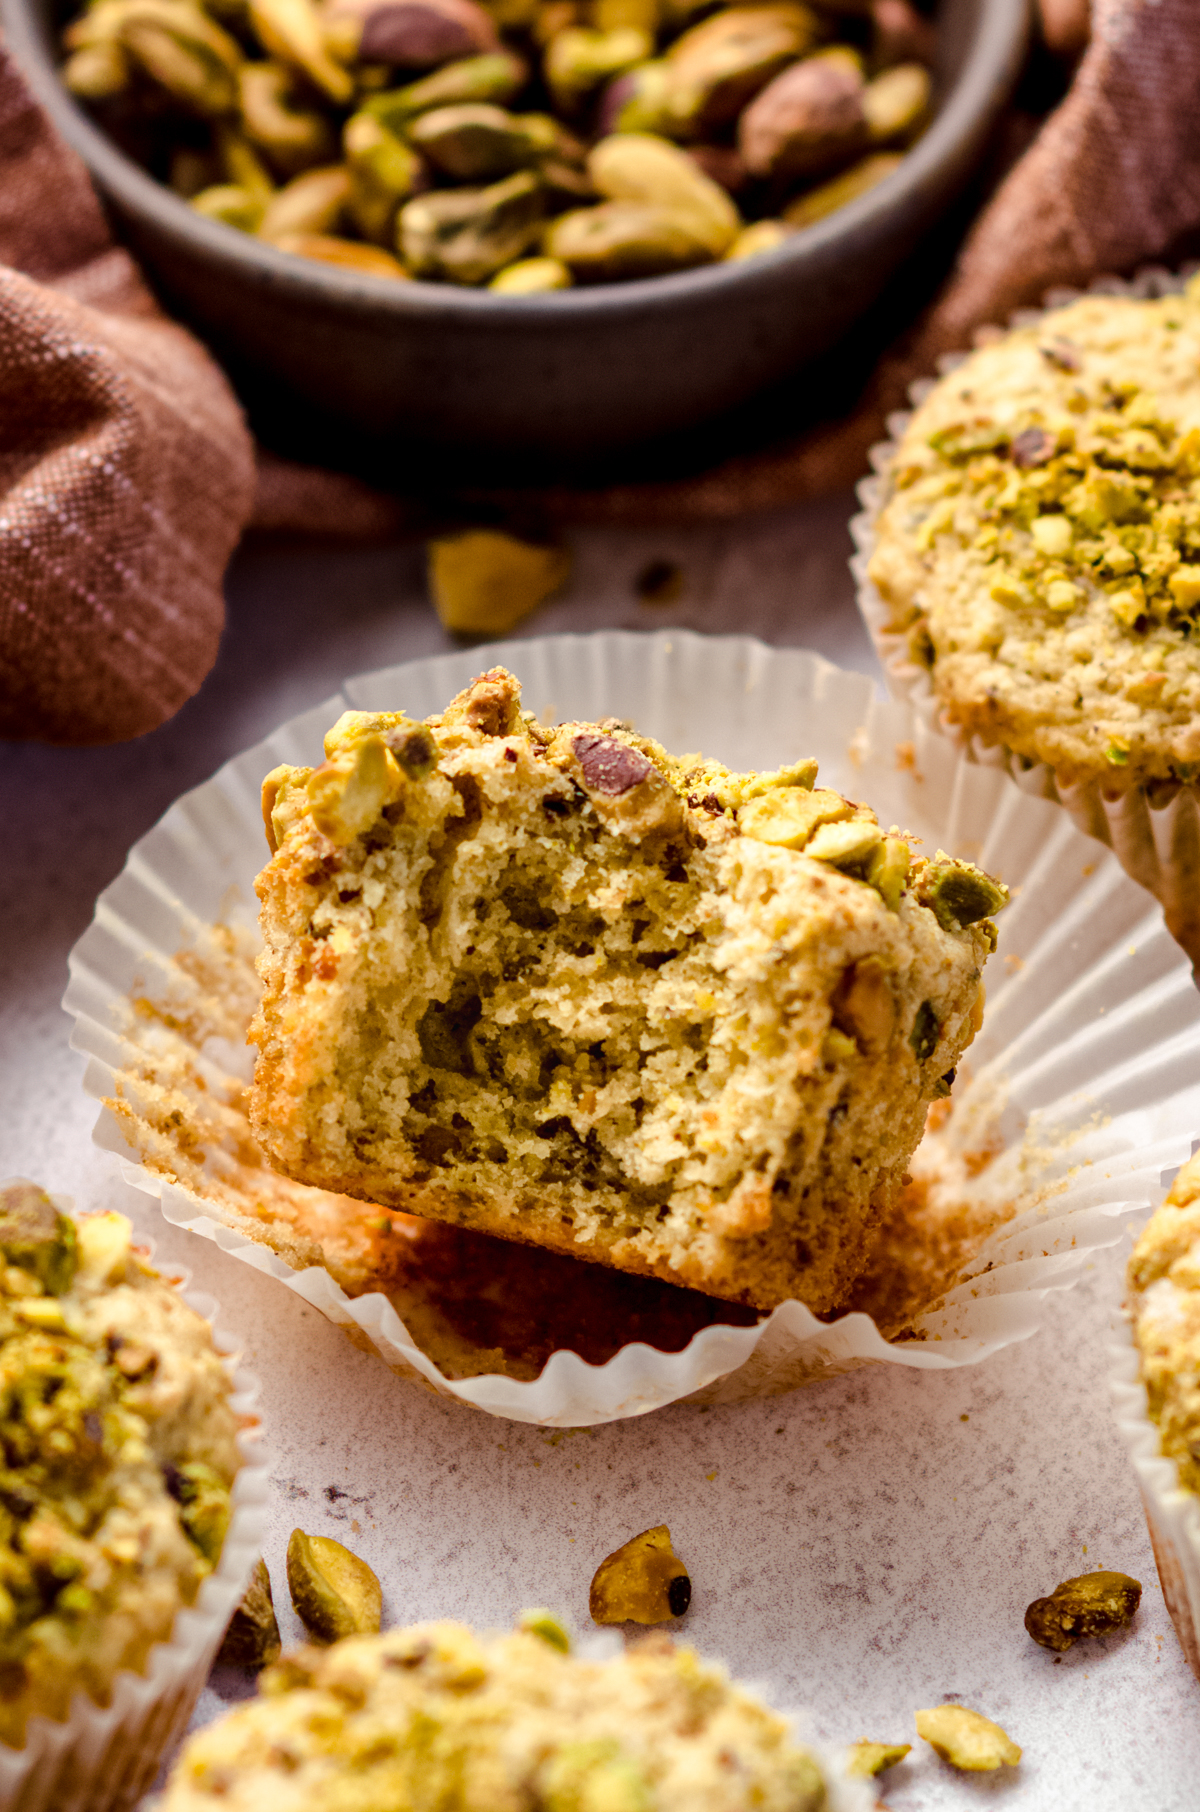 A pistachio muffin with a bite taken out of it.